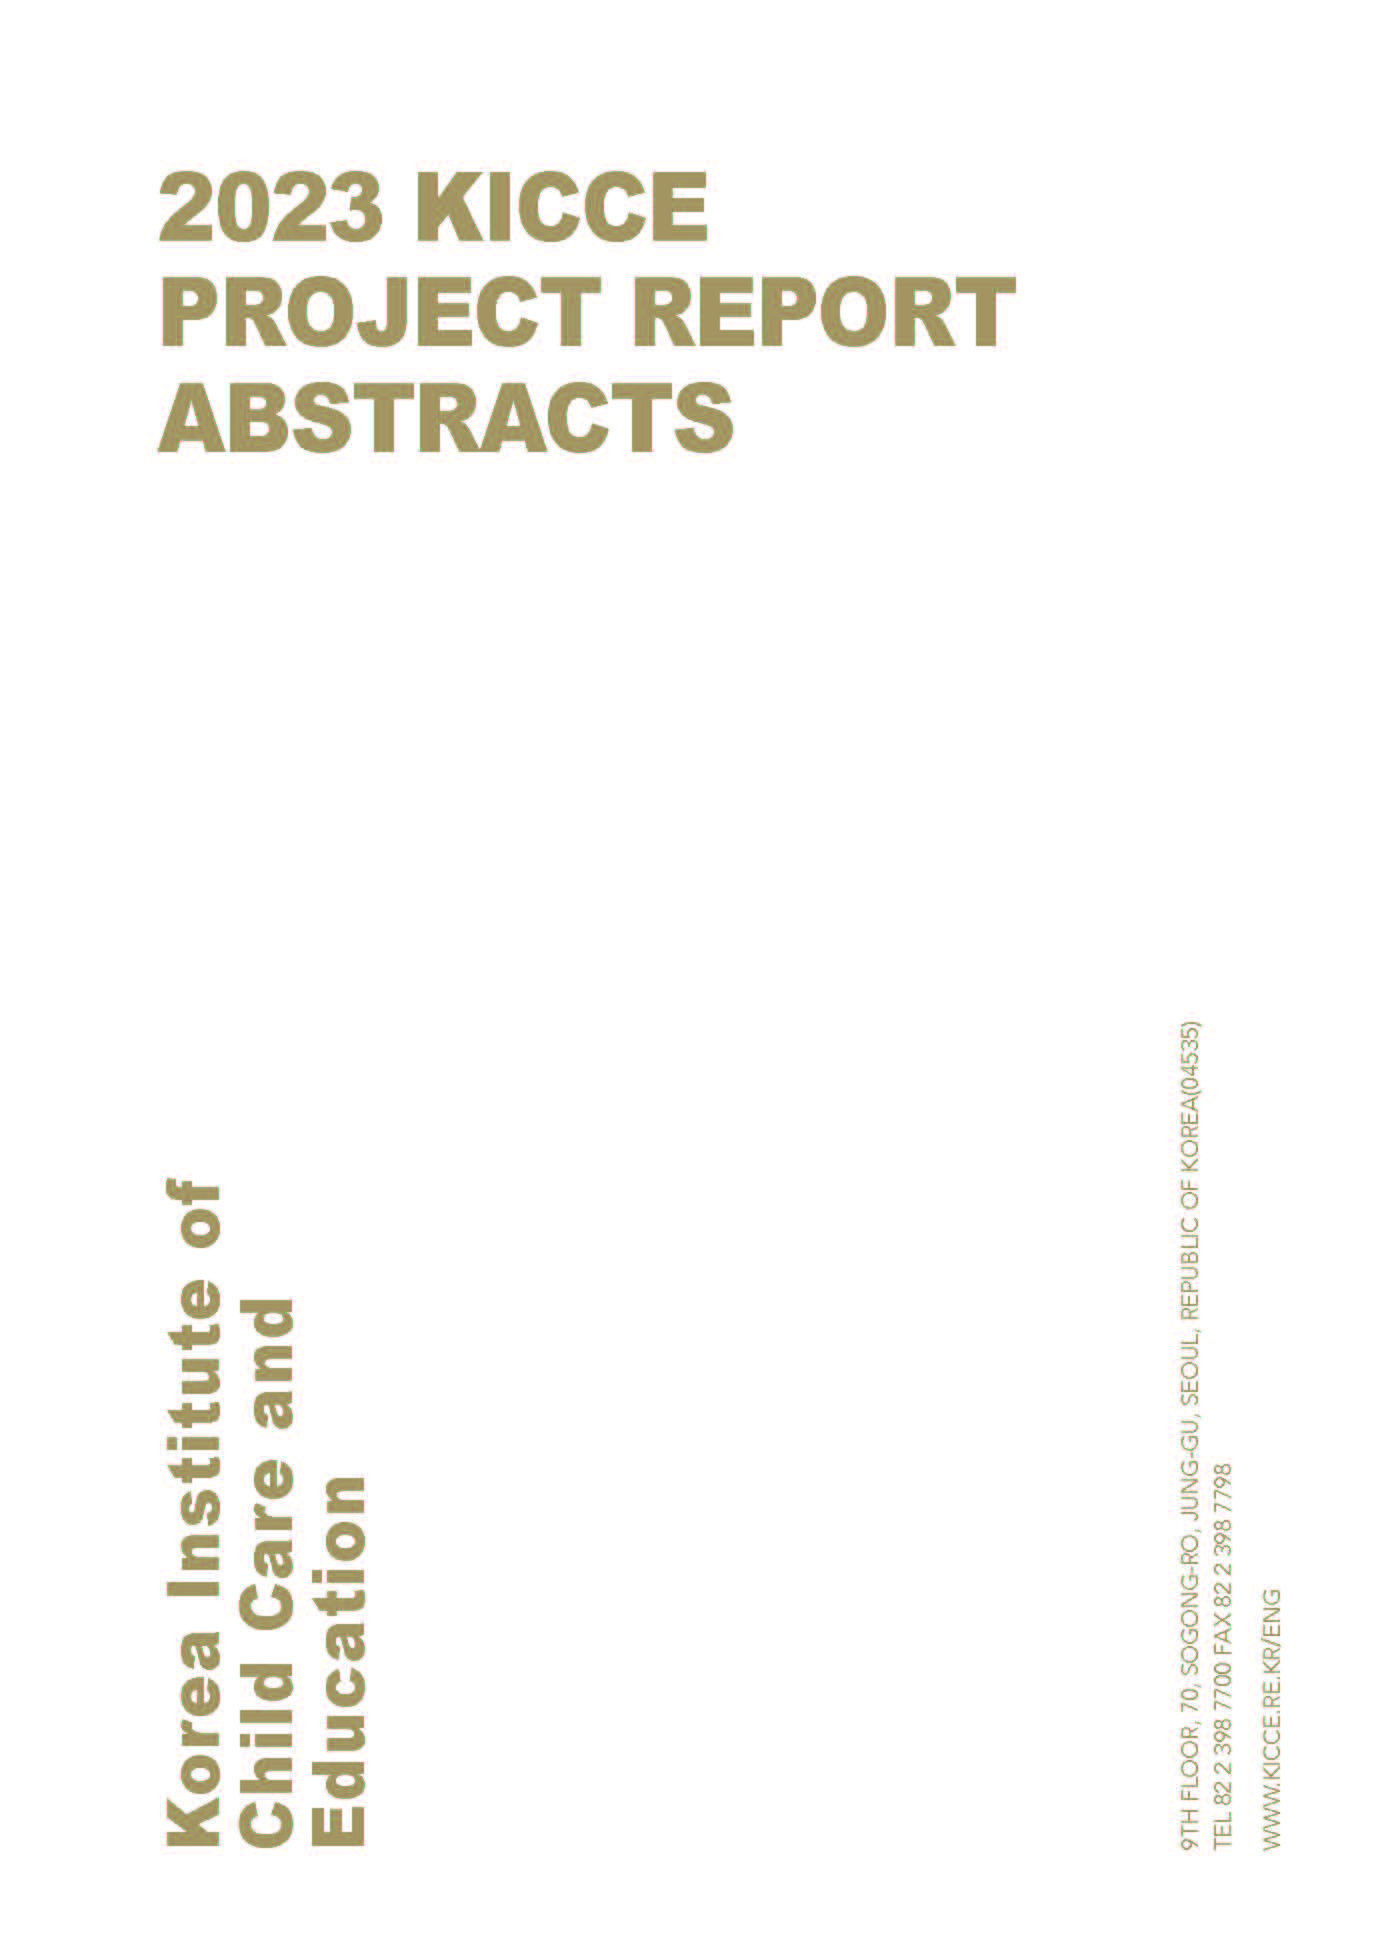 2023 KICCE Project Report Abstracts 표지 이미지 입니다.